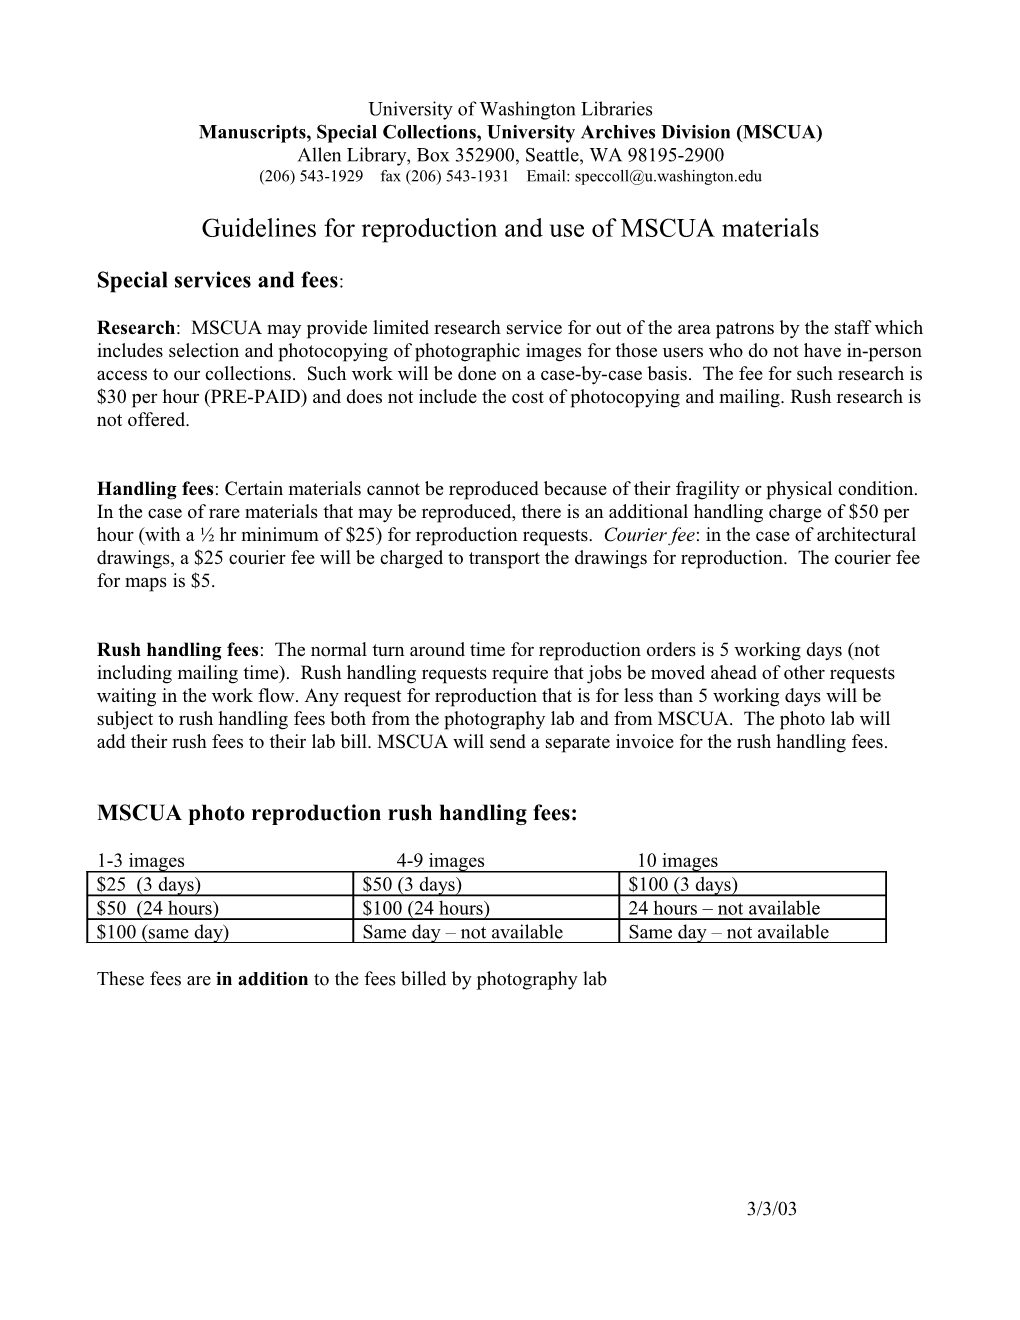 Guidelines for Reproduction and Use of MSCUA Materials